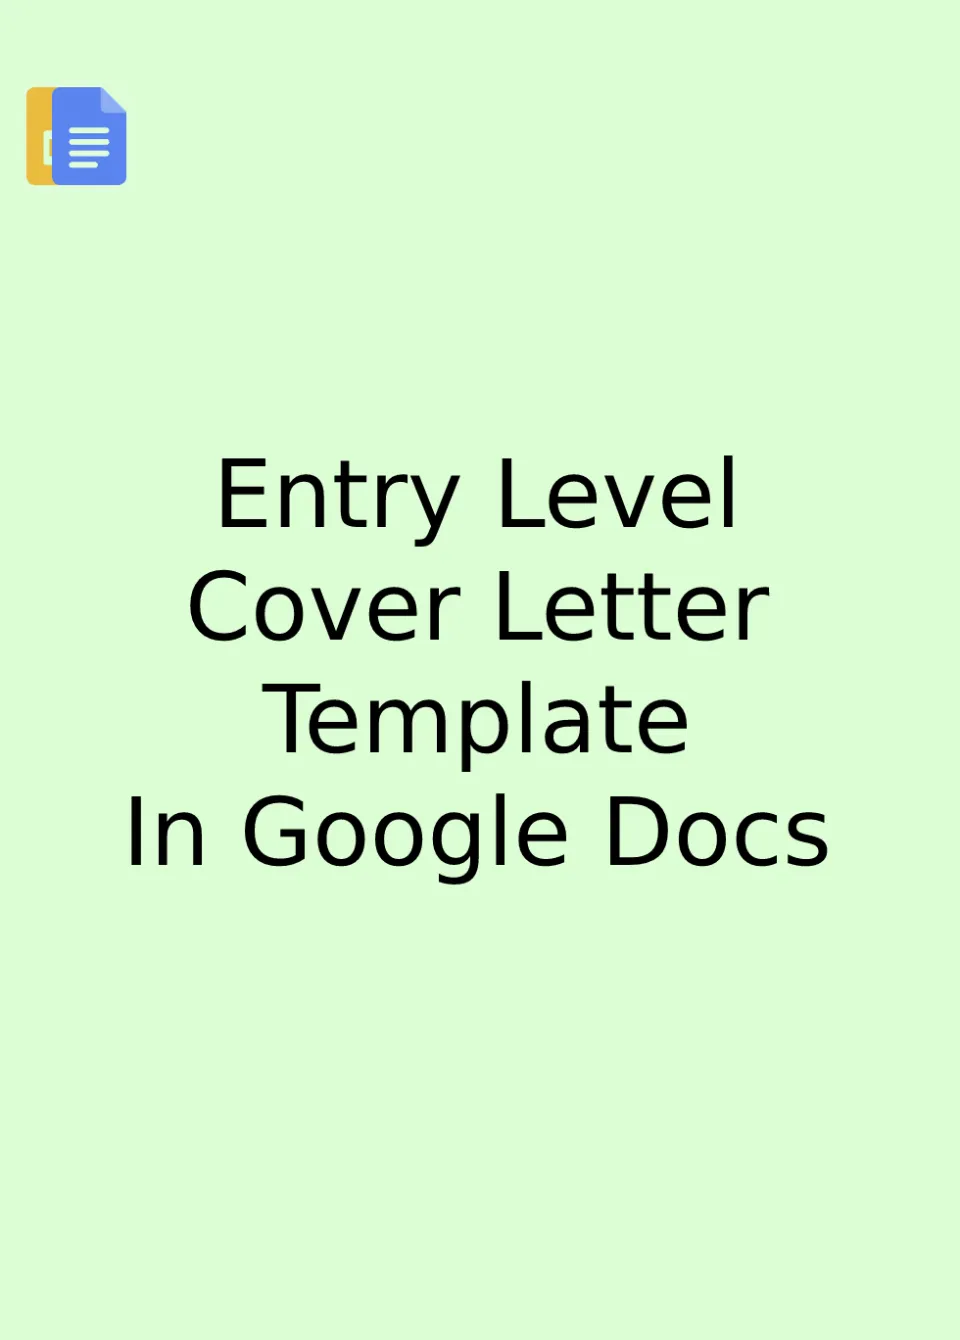 Entry Level Cover Letter Template Google Docs